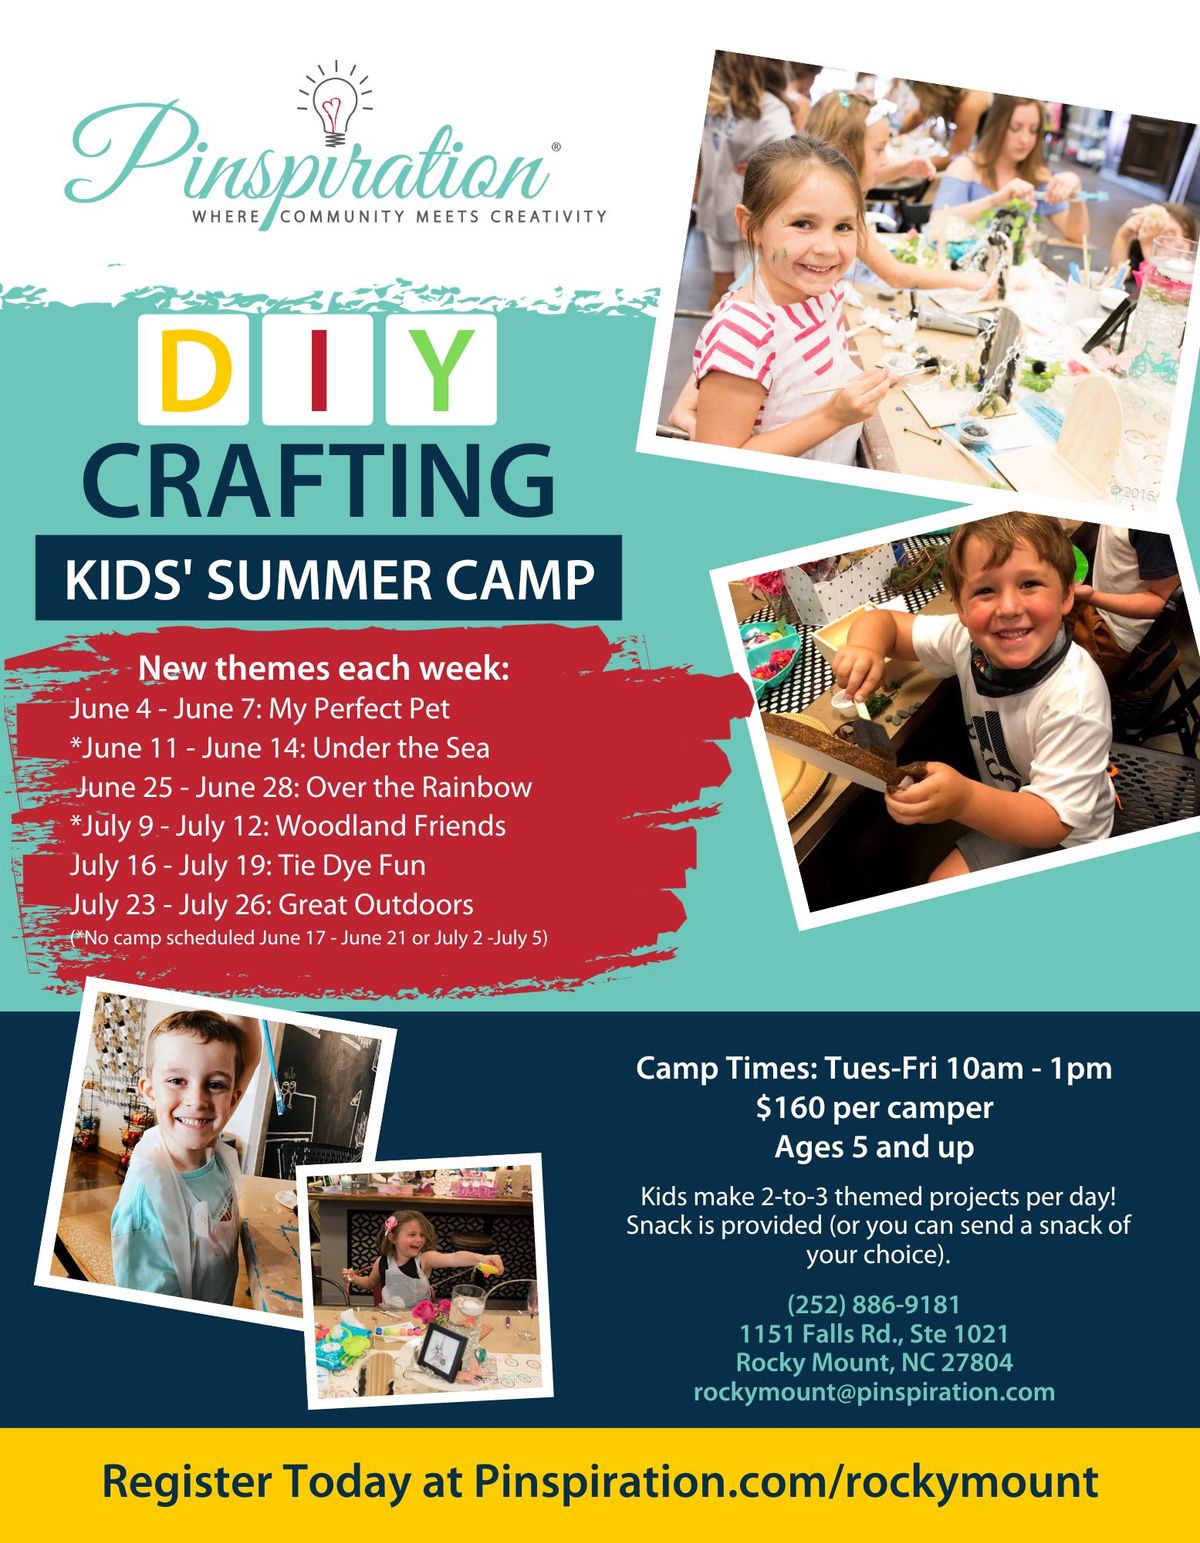 Over the Rainbow Crafting Summer Camp